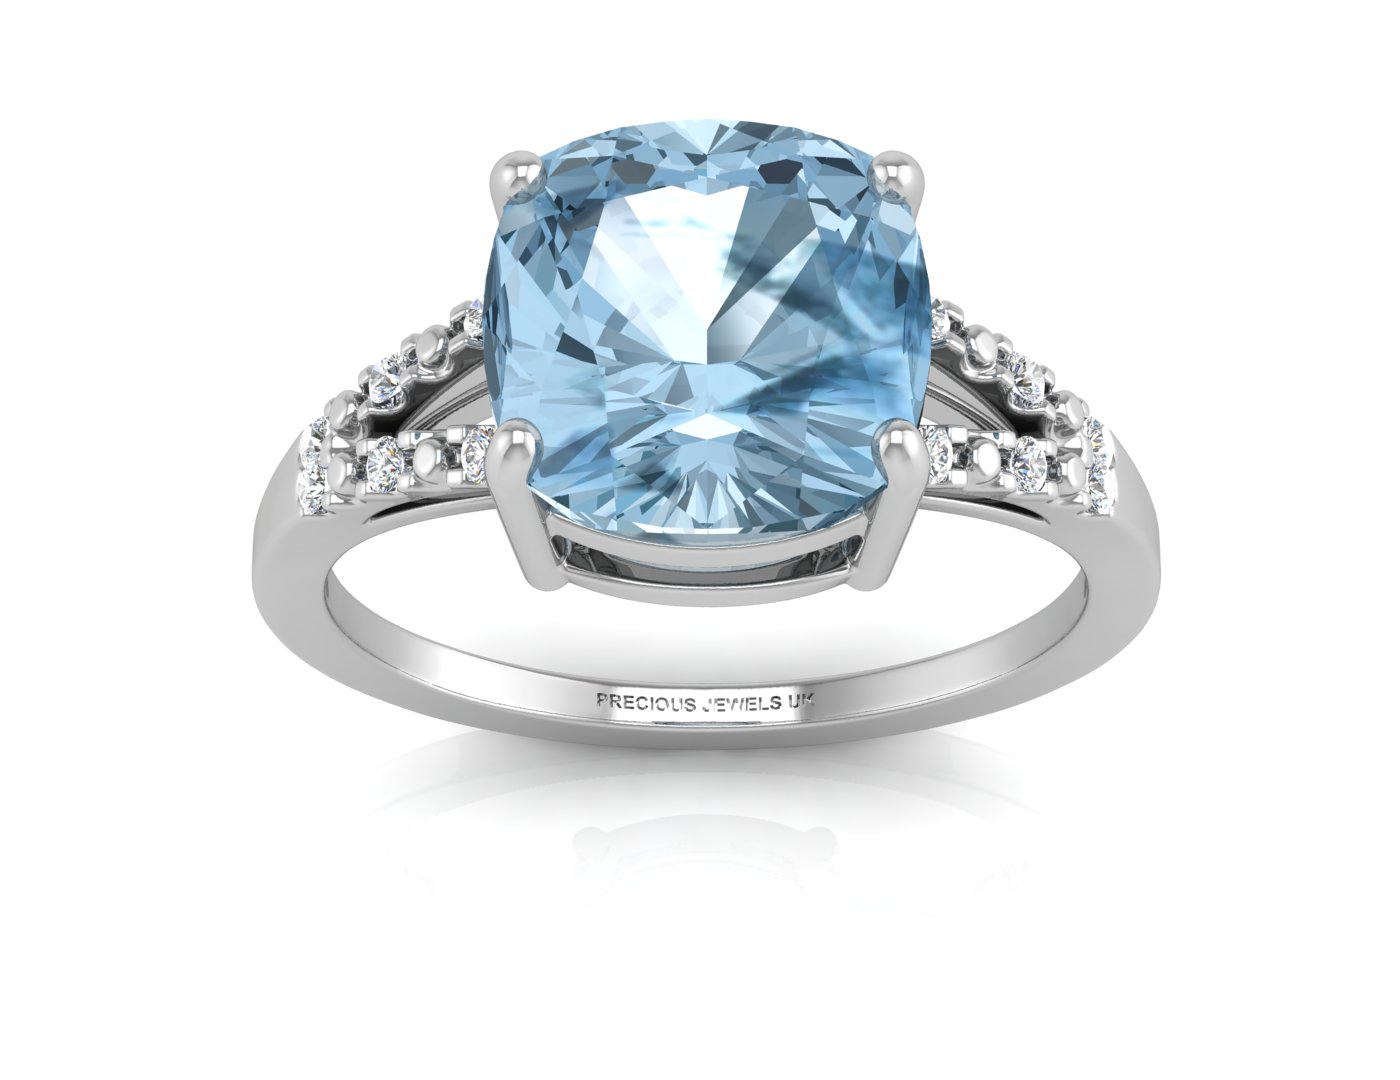 9k White Gold Cushion Cut Blue Topaz With Diamond Set Shoulders Ring - Image 3 of 5